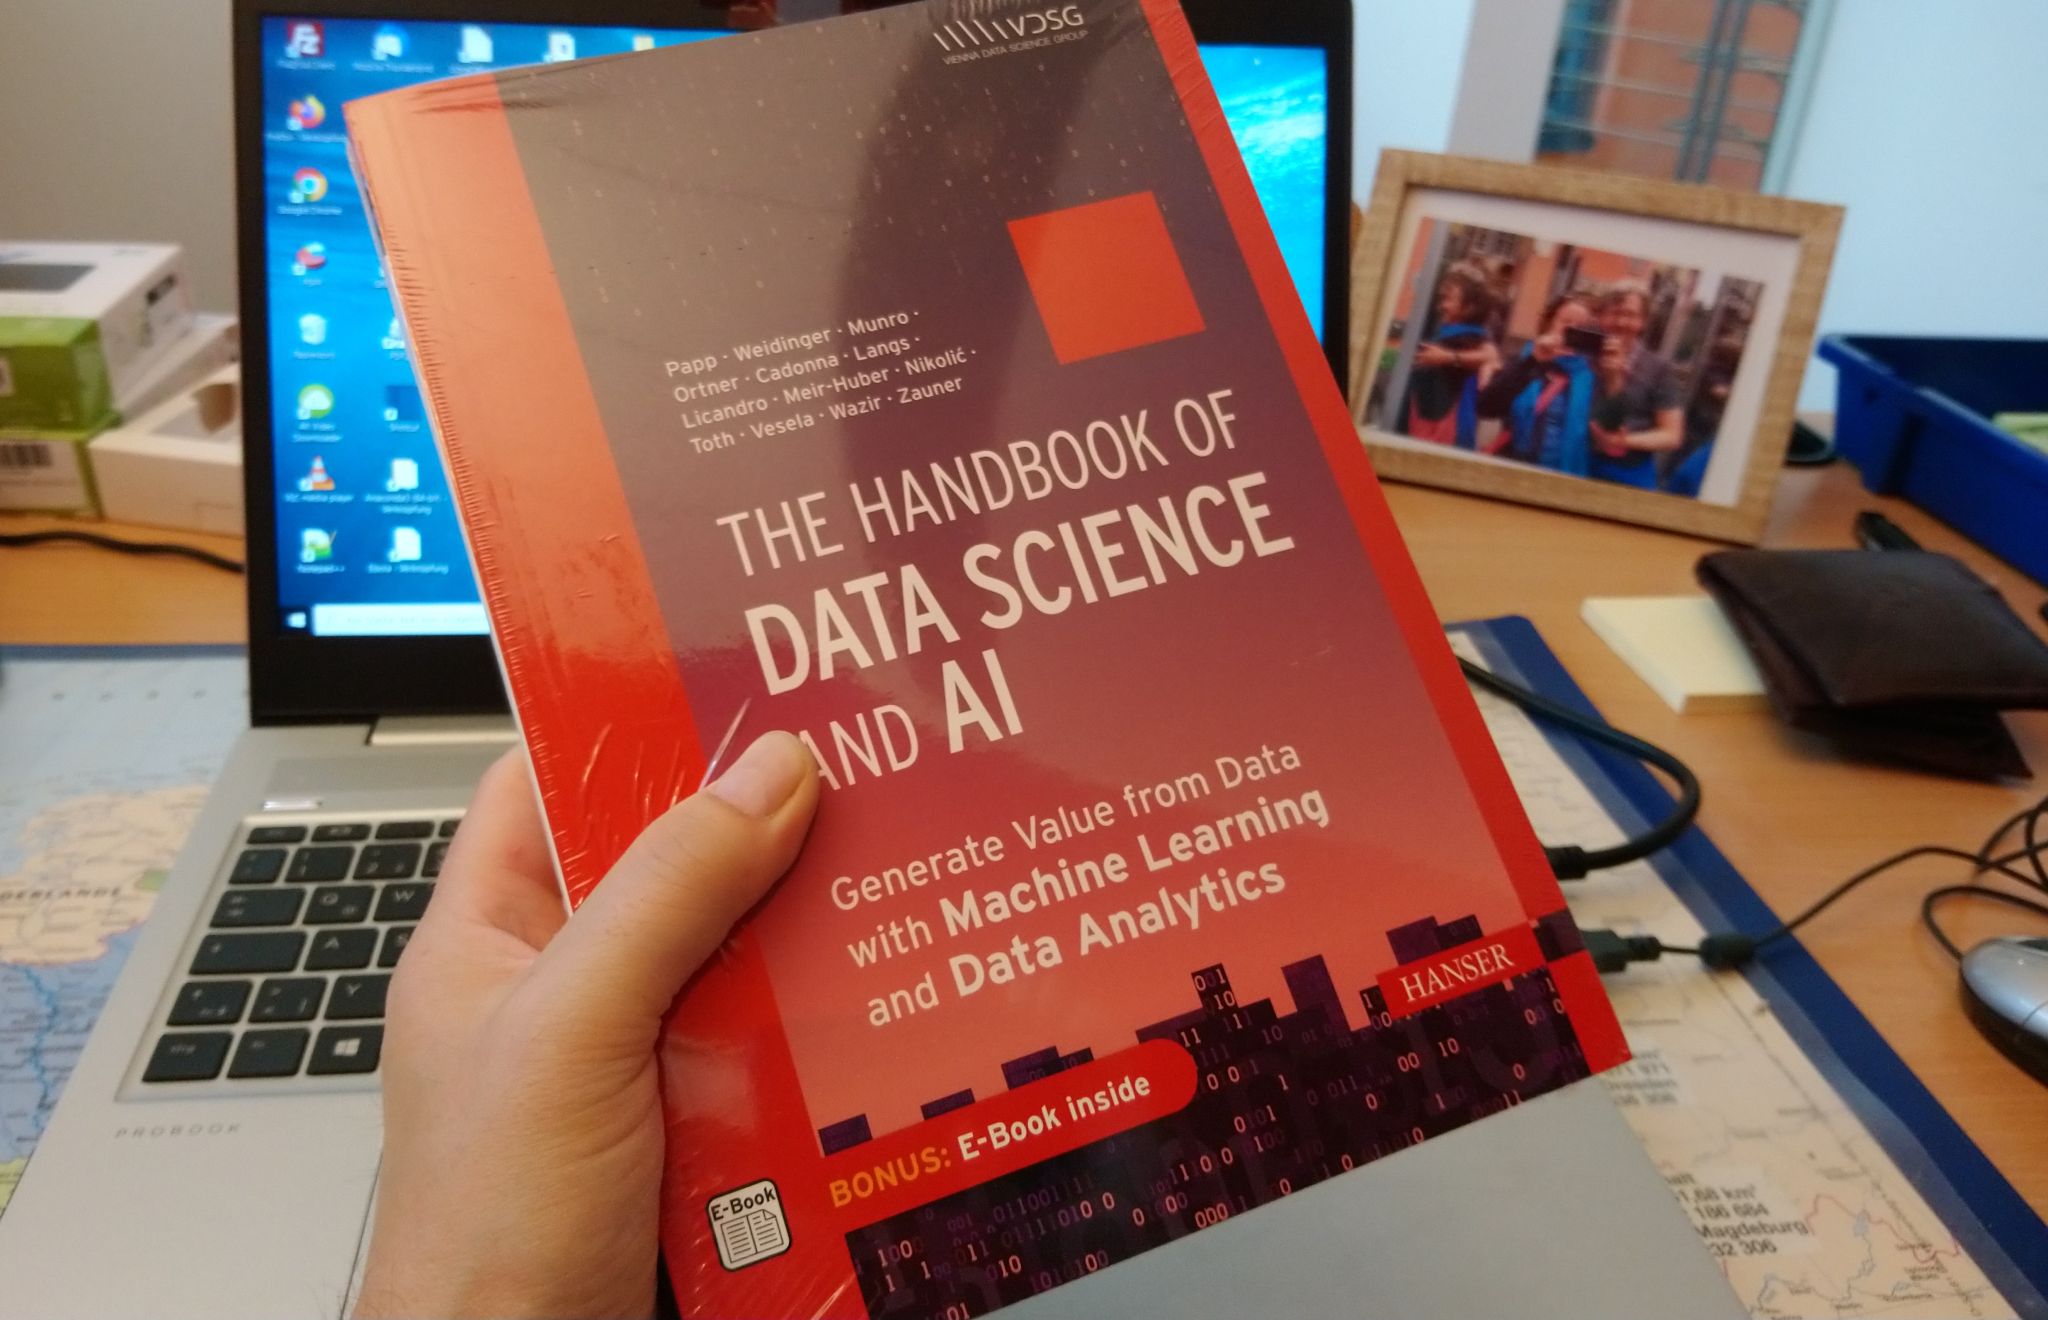 The Handbook of Data Science and AI